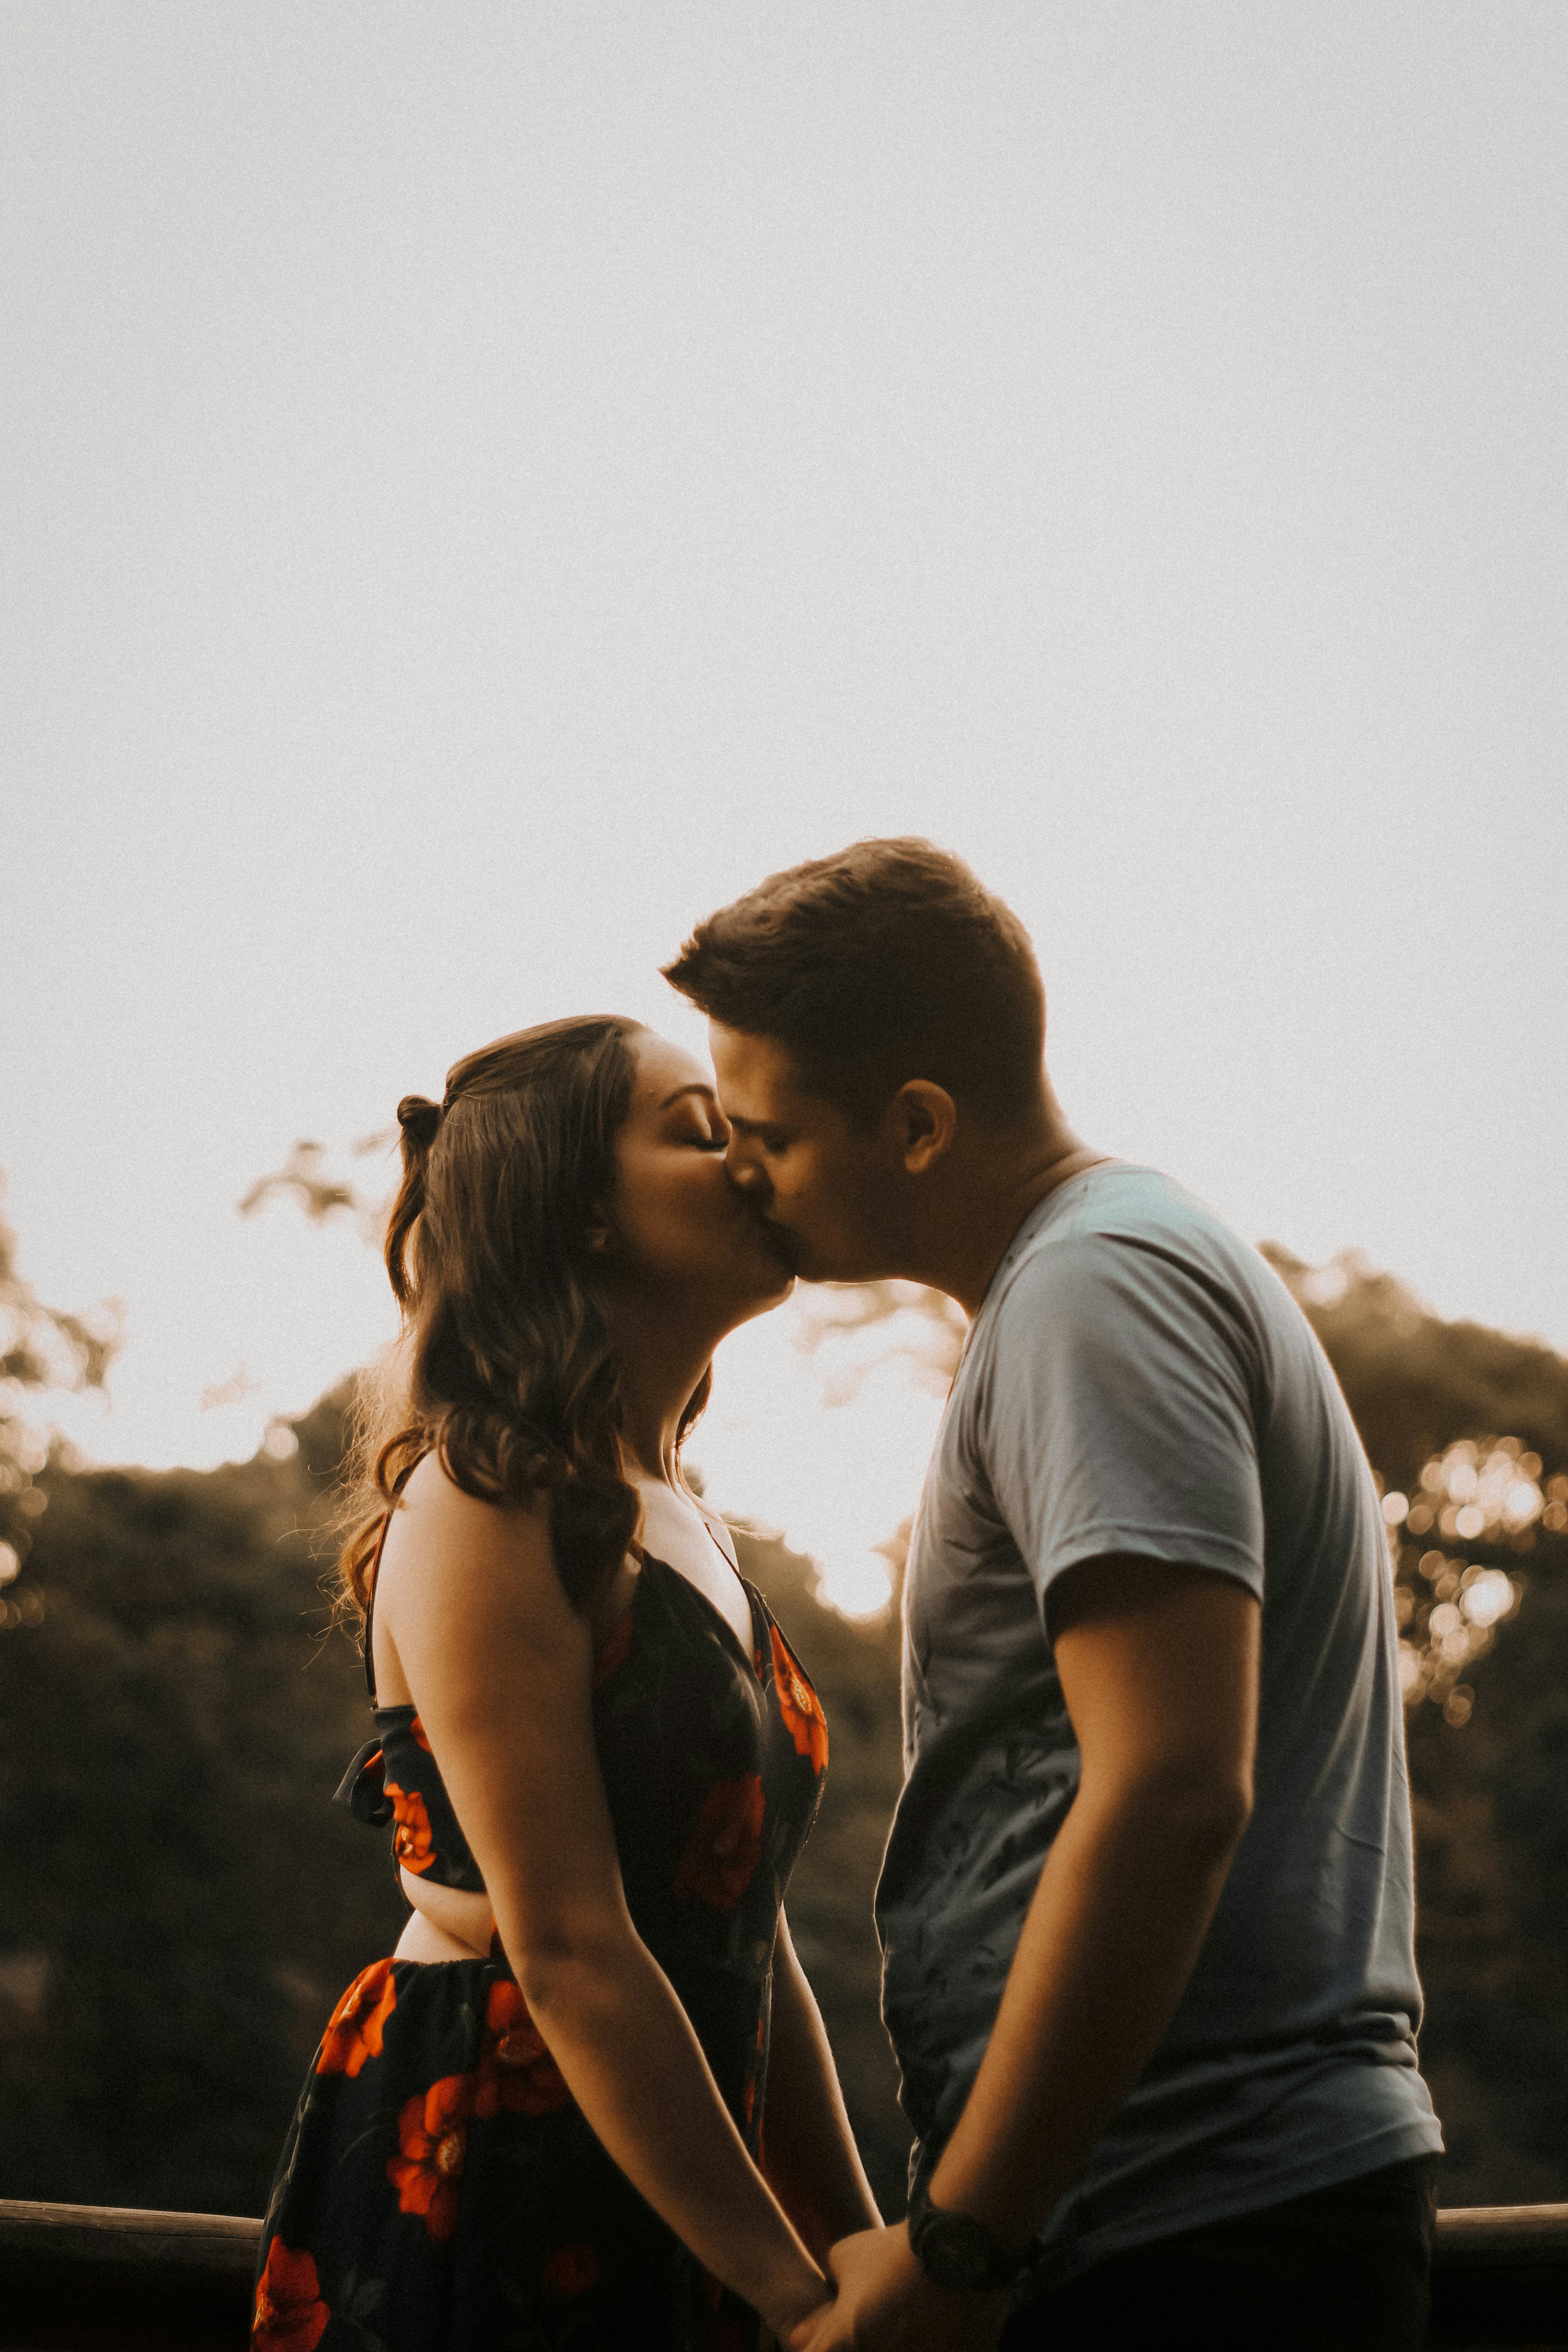 100+ Kissing Pictures Download Free Images on Unsplash